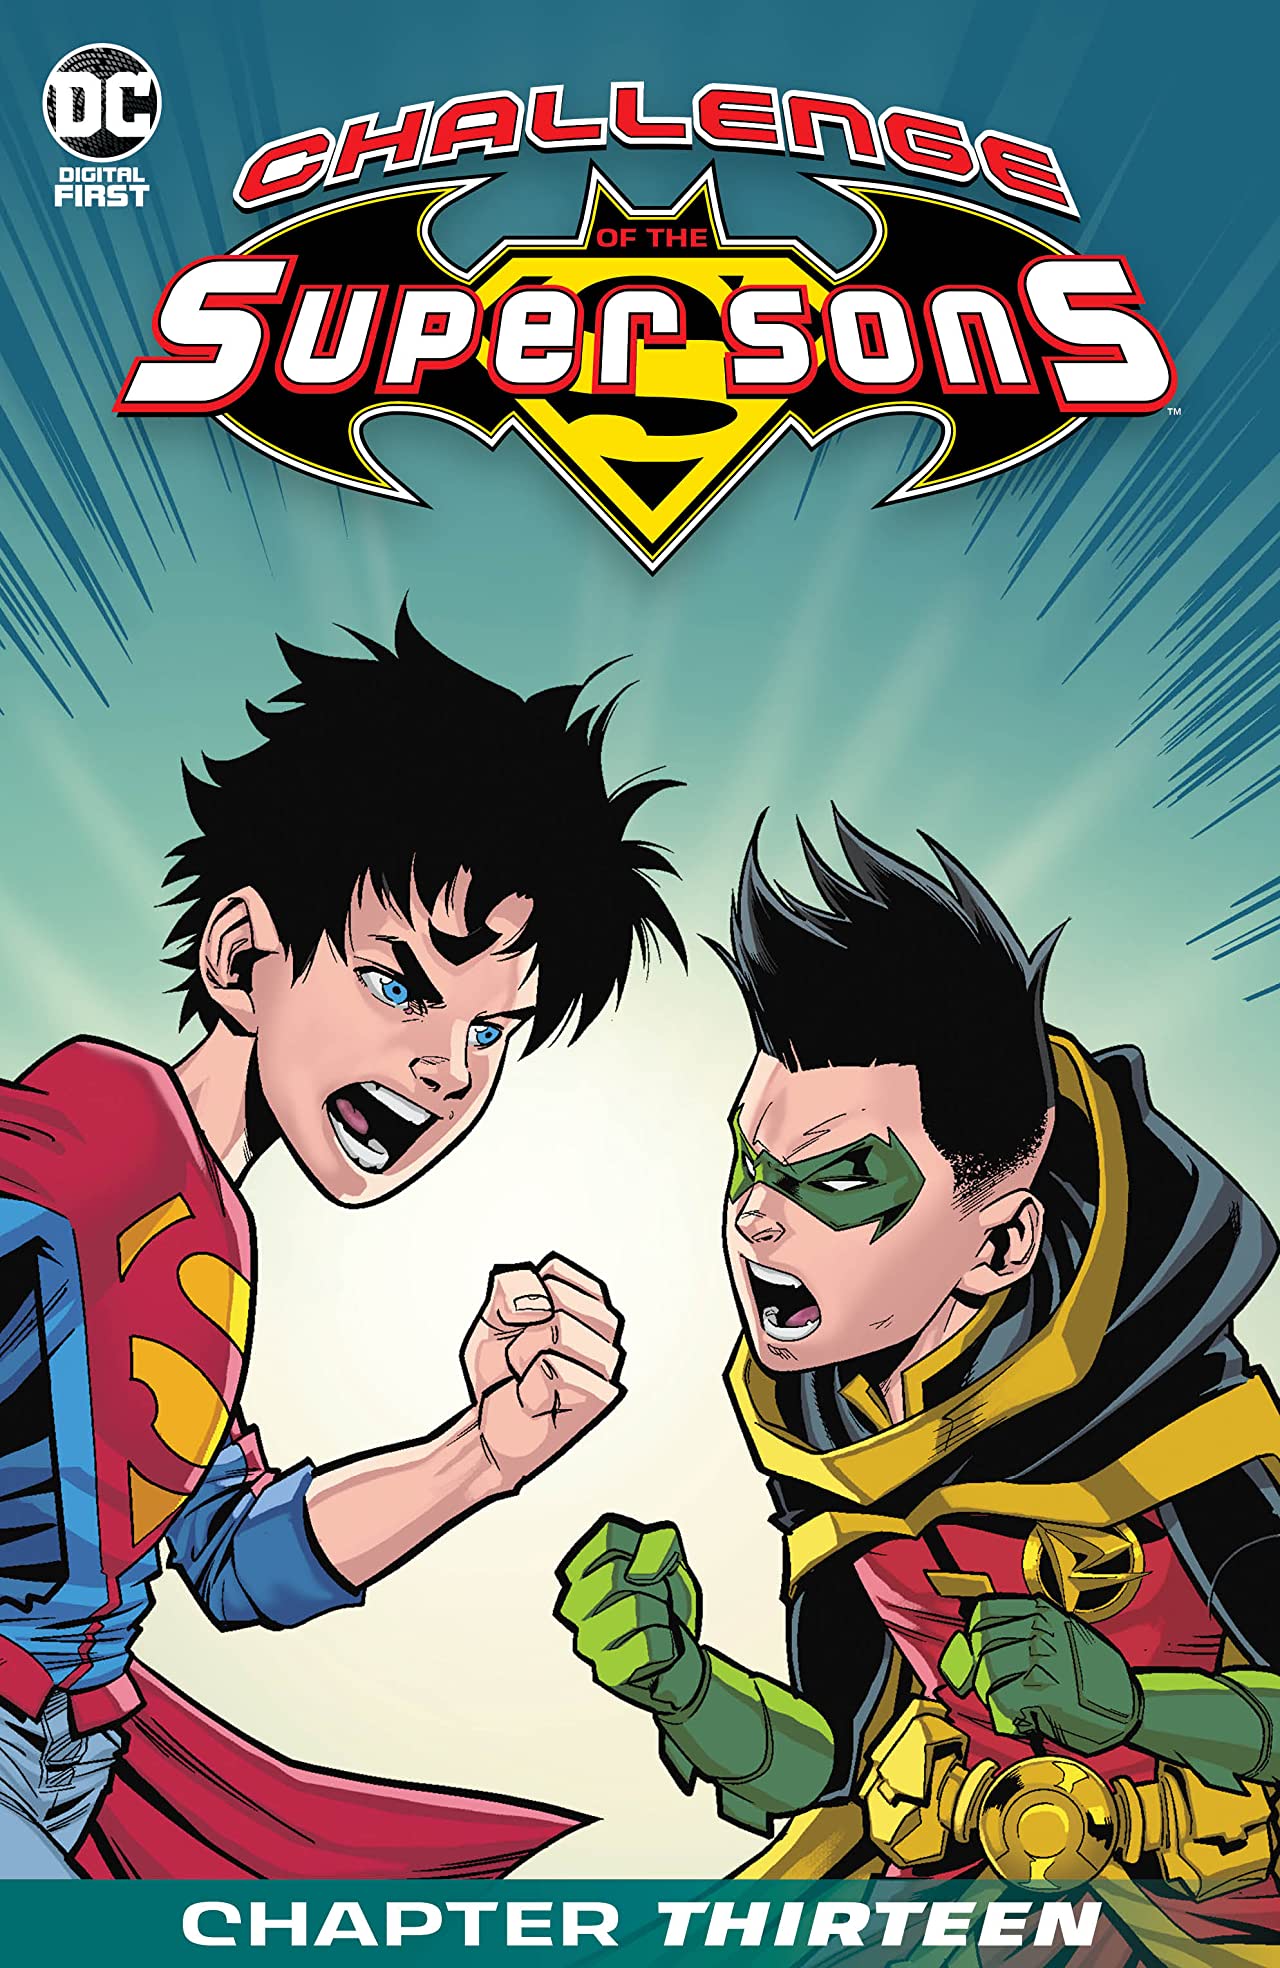 Spoiler Details for “Batman and Superman: Battle of the Super Sons” Animated Movie